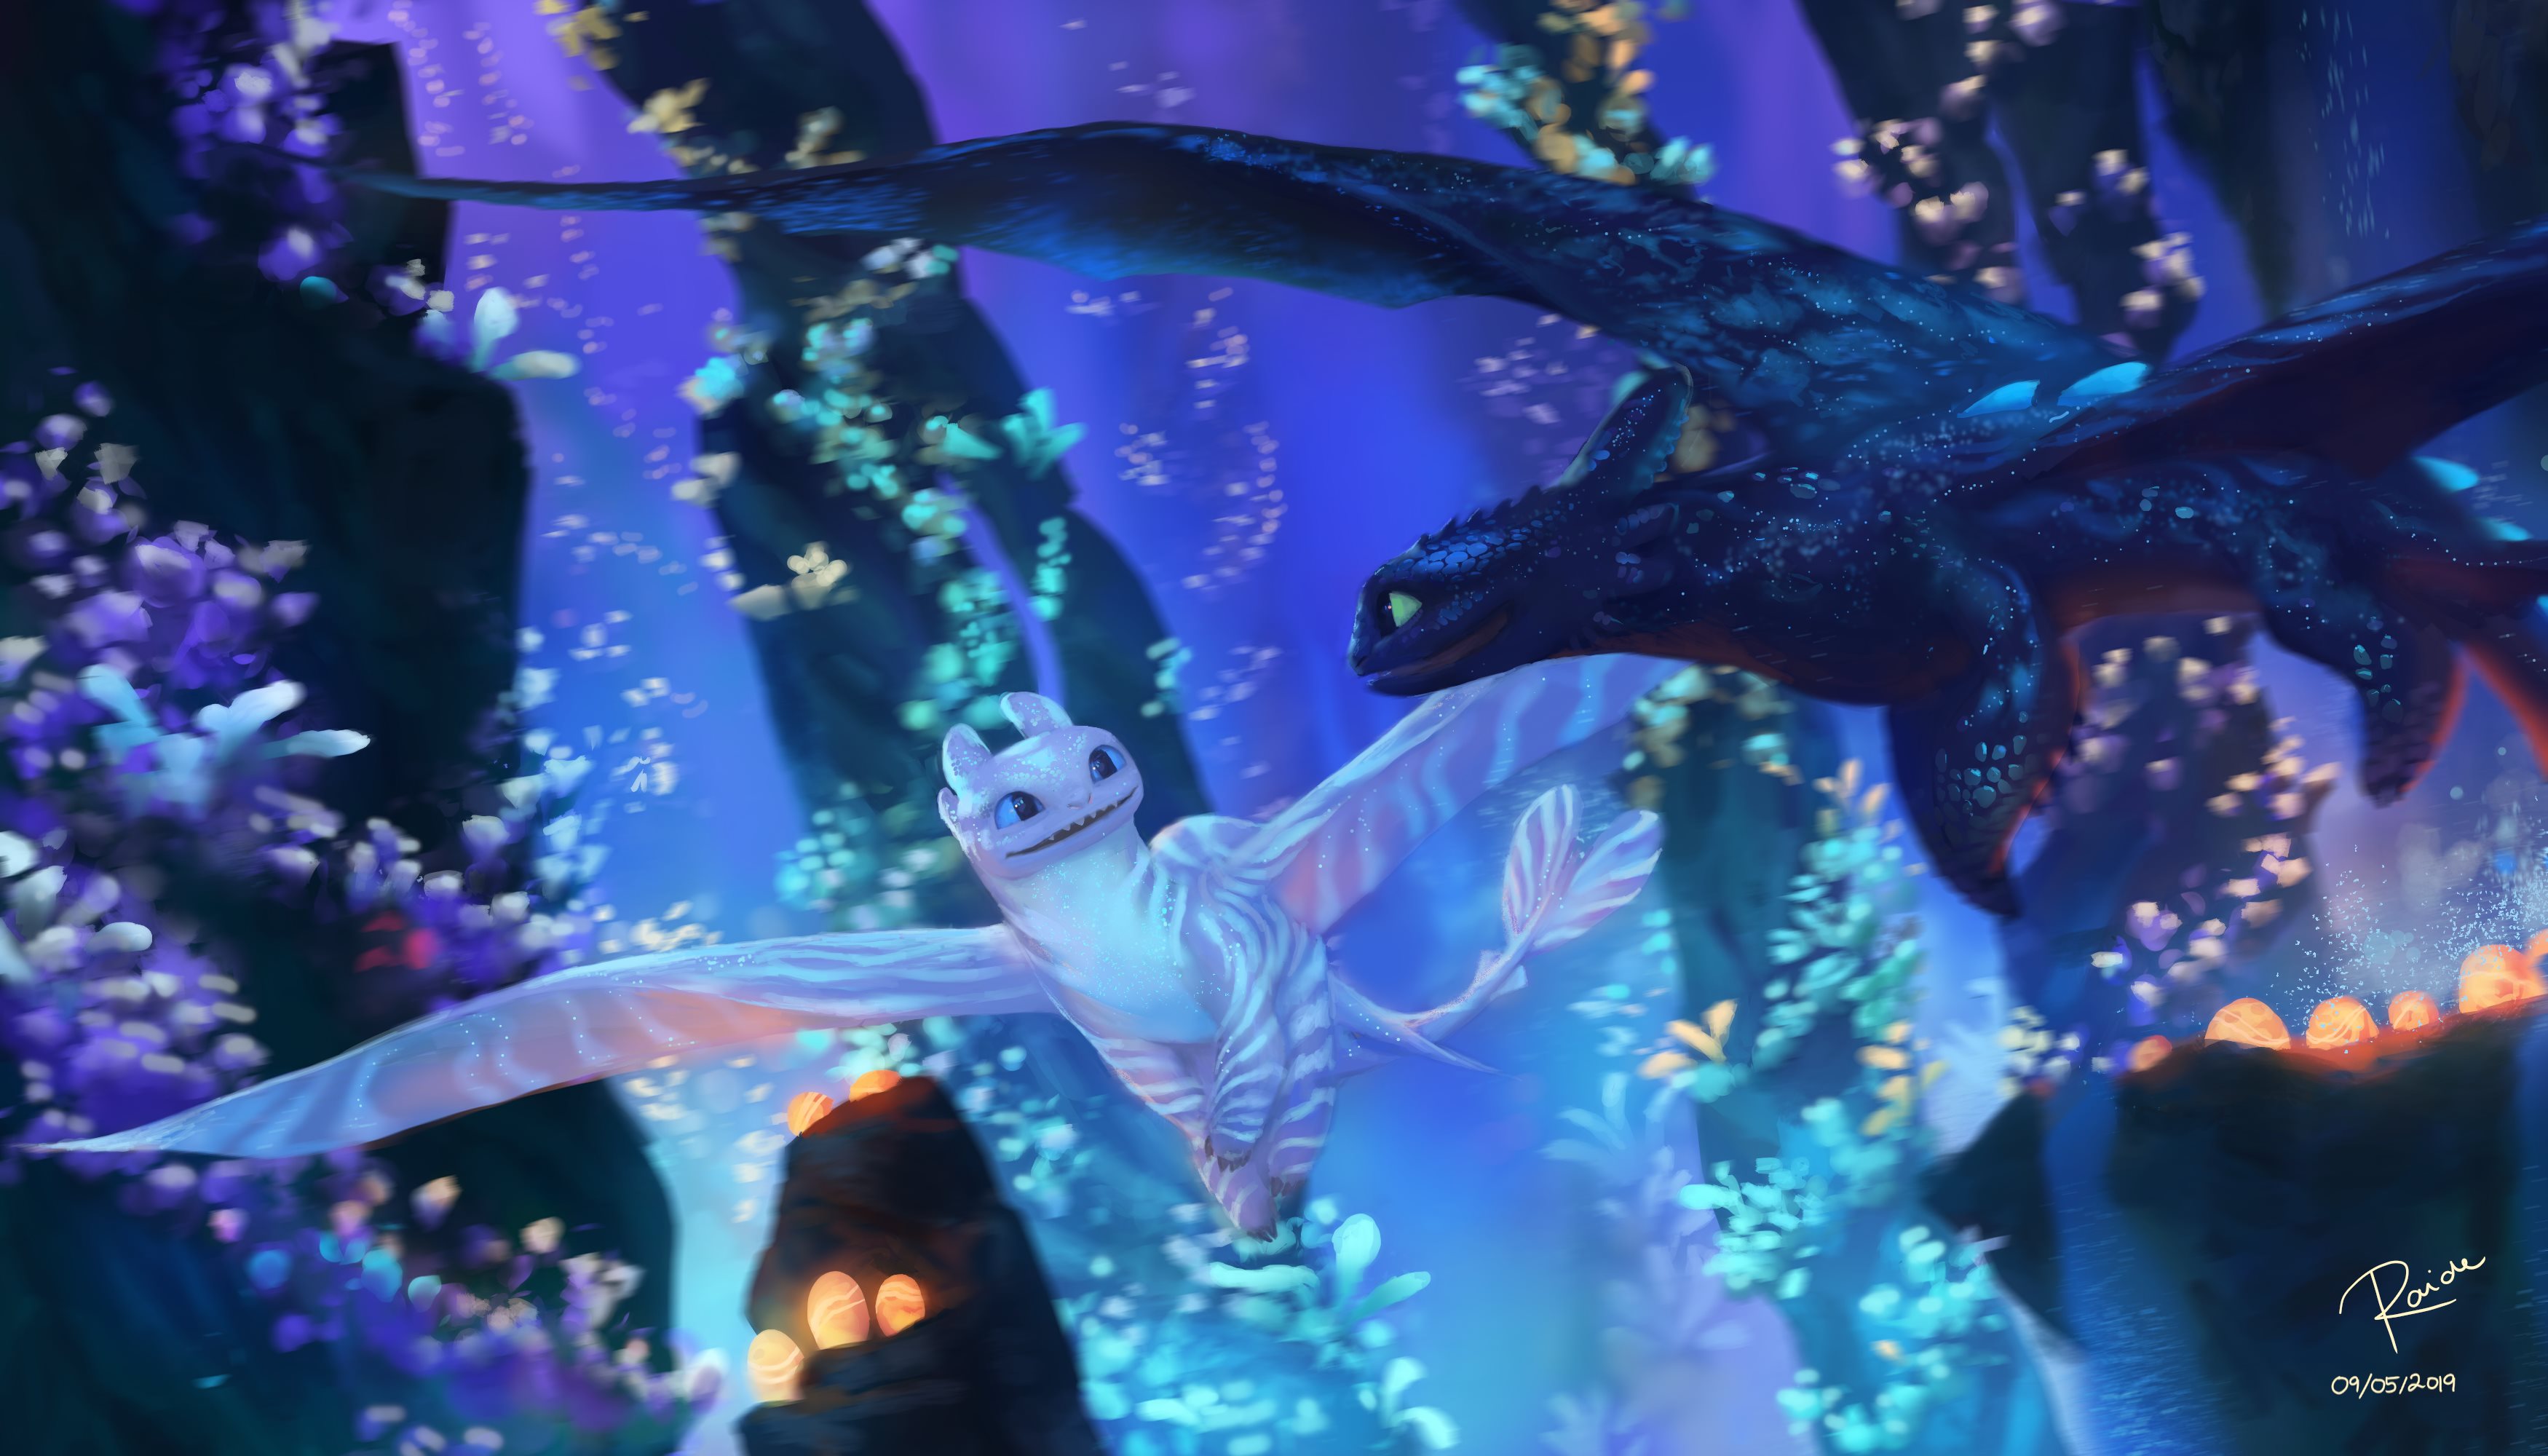 how to train your dragon 3 free